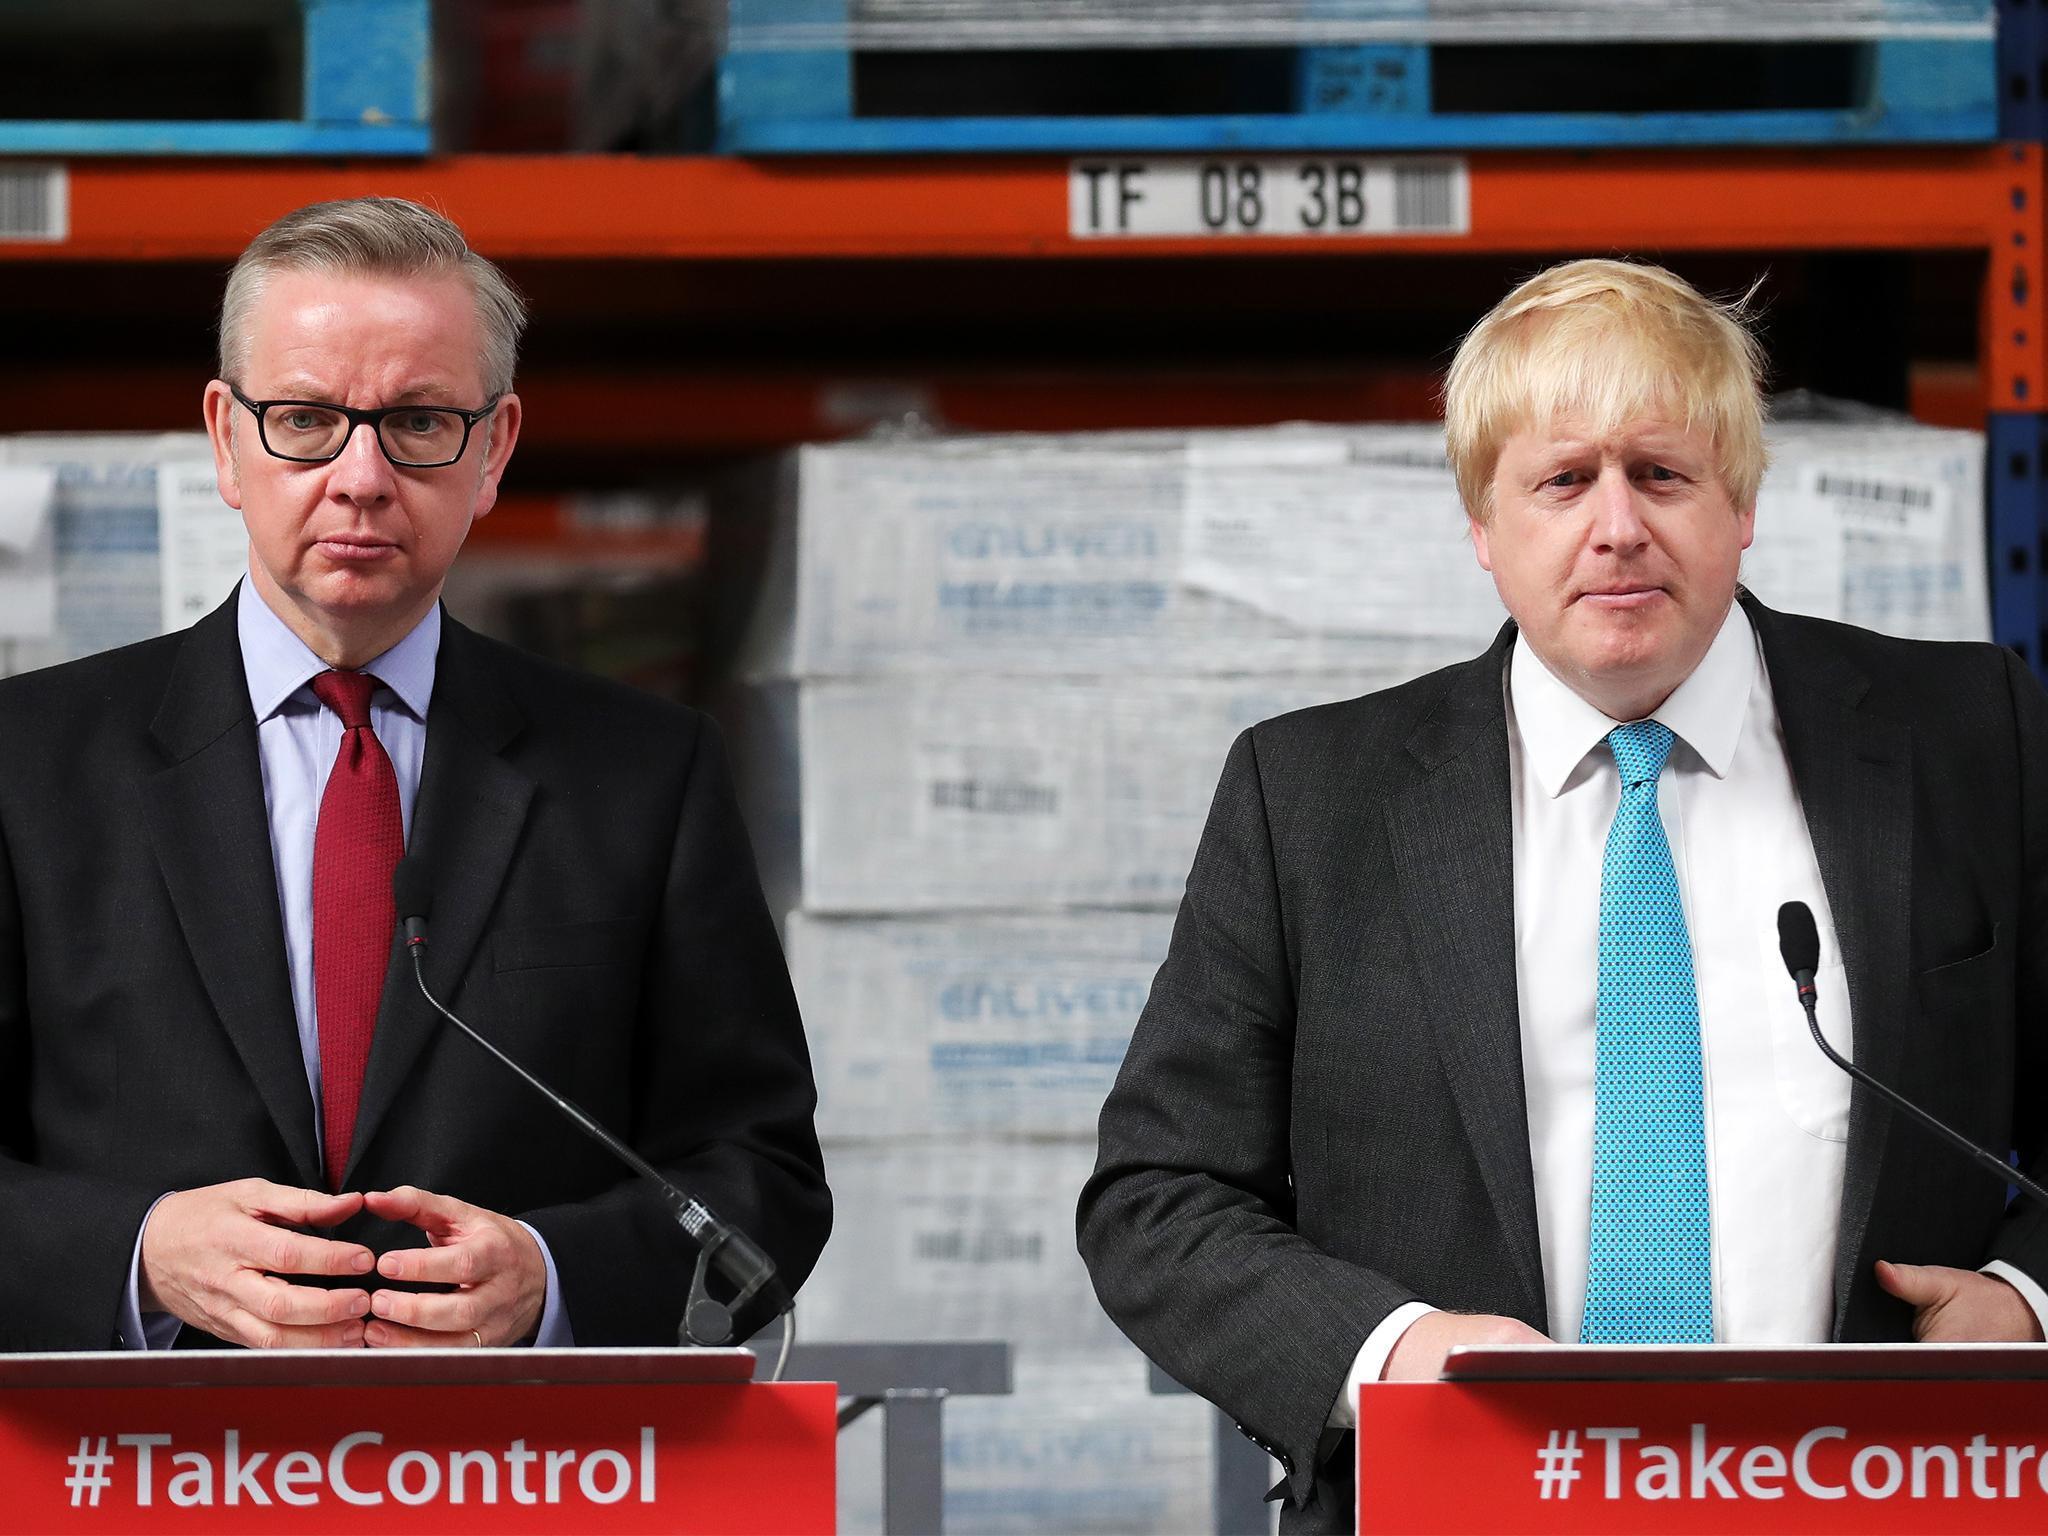 Michael Gove and Boris Johnson have helped propel the Leave campaign into a significant lead over their Remain rivals